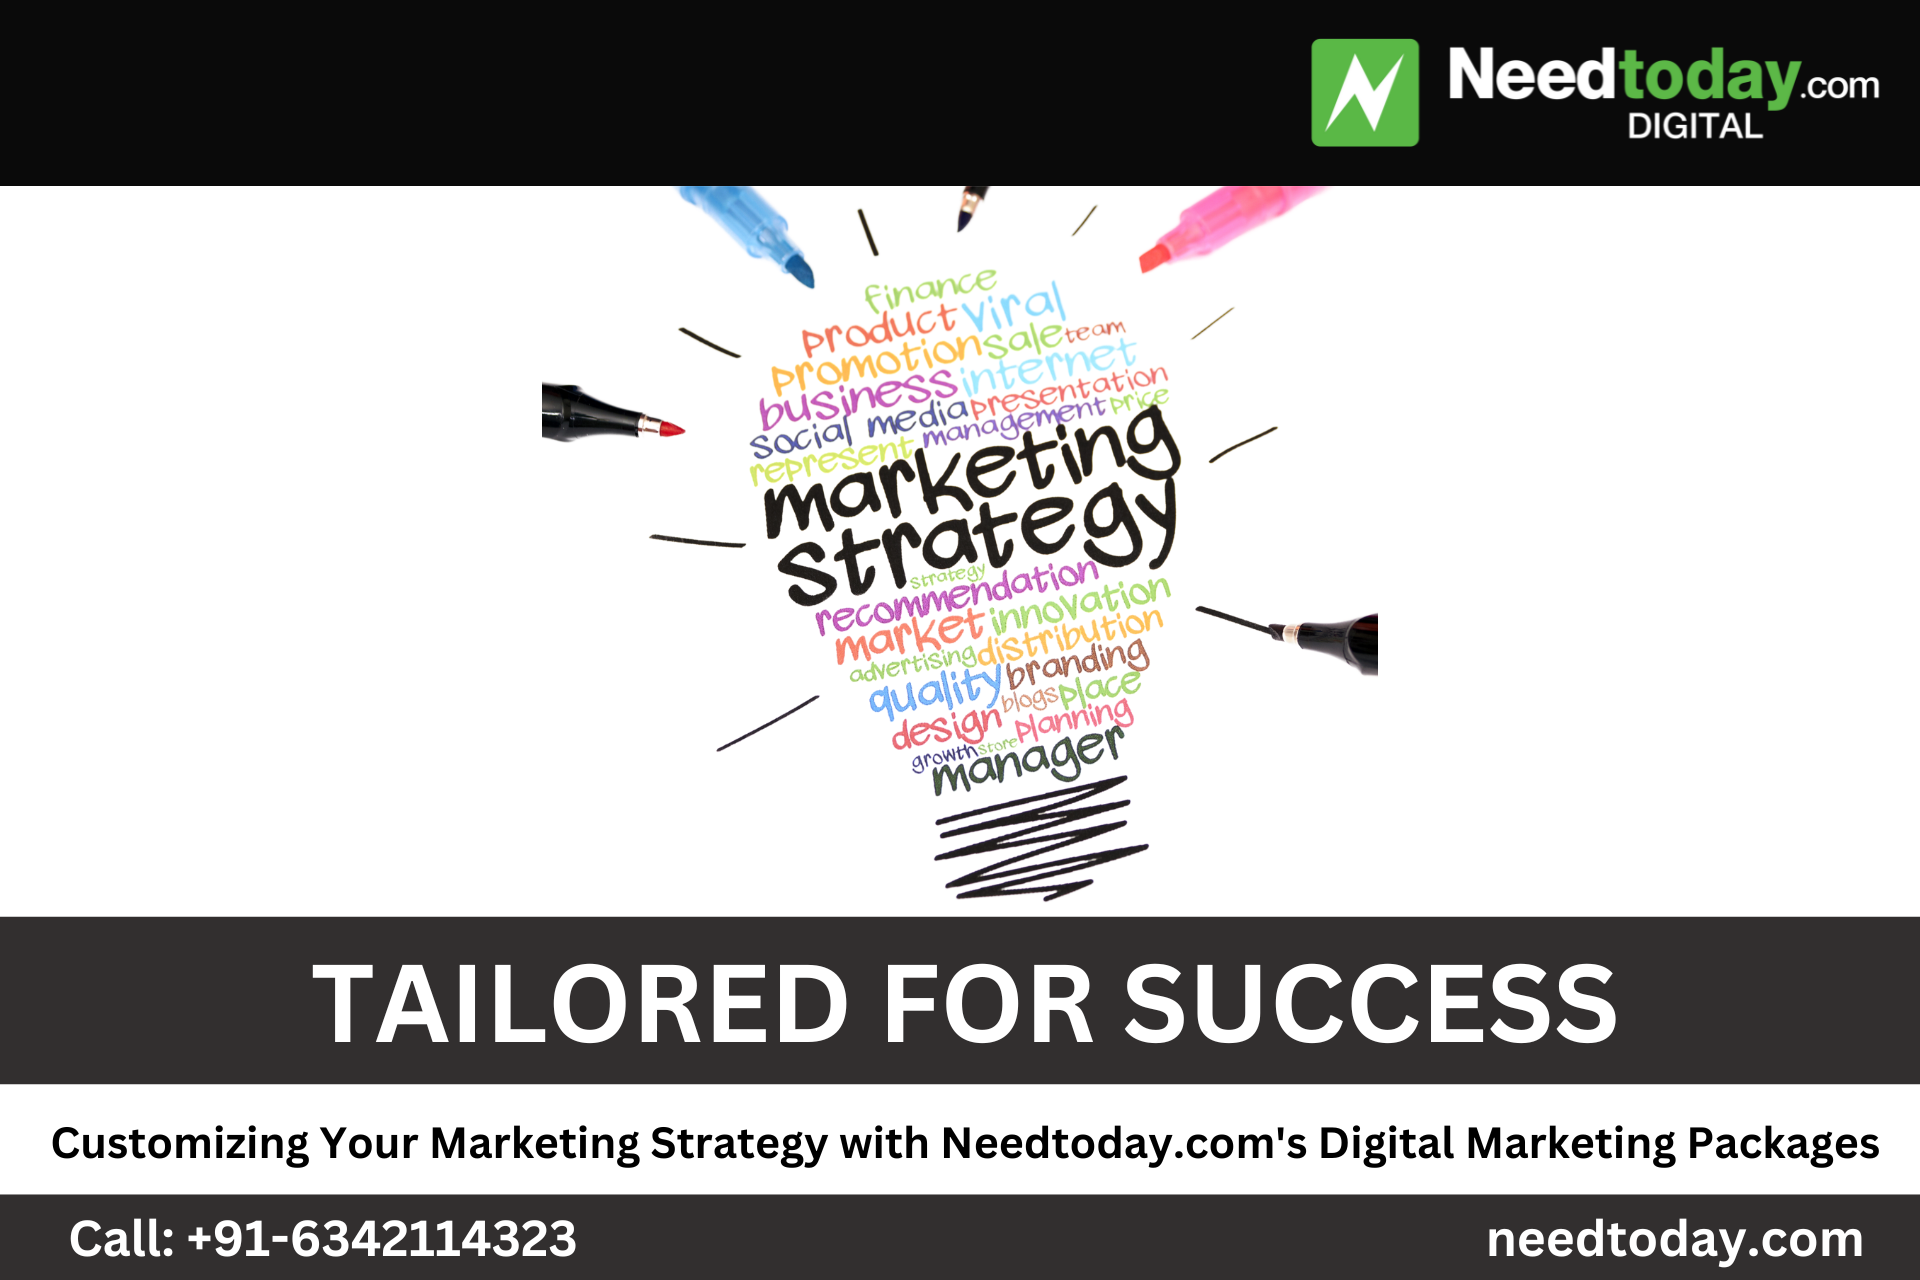 Tailored for Success: Customizing Your Marketing Strategy with Needtoday.com's Digital Marketing Packages